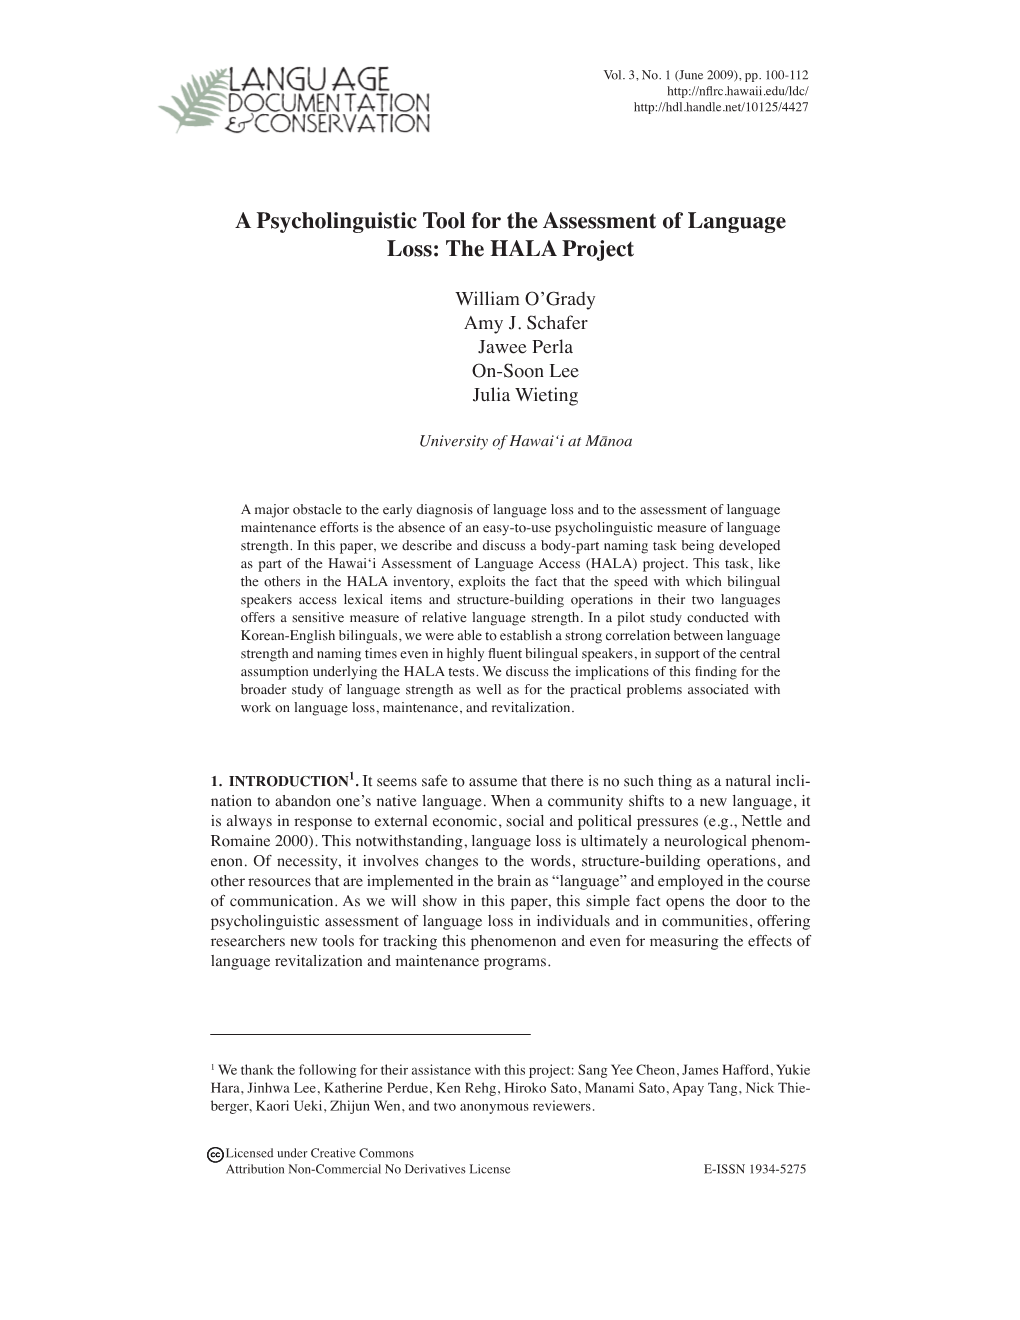 A Psycholinguistic Tool for the Assessment of Language Loss: the HALA Project